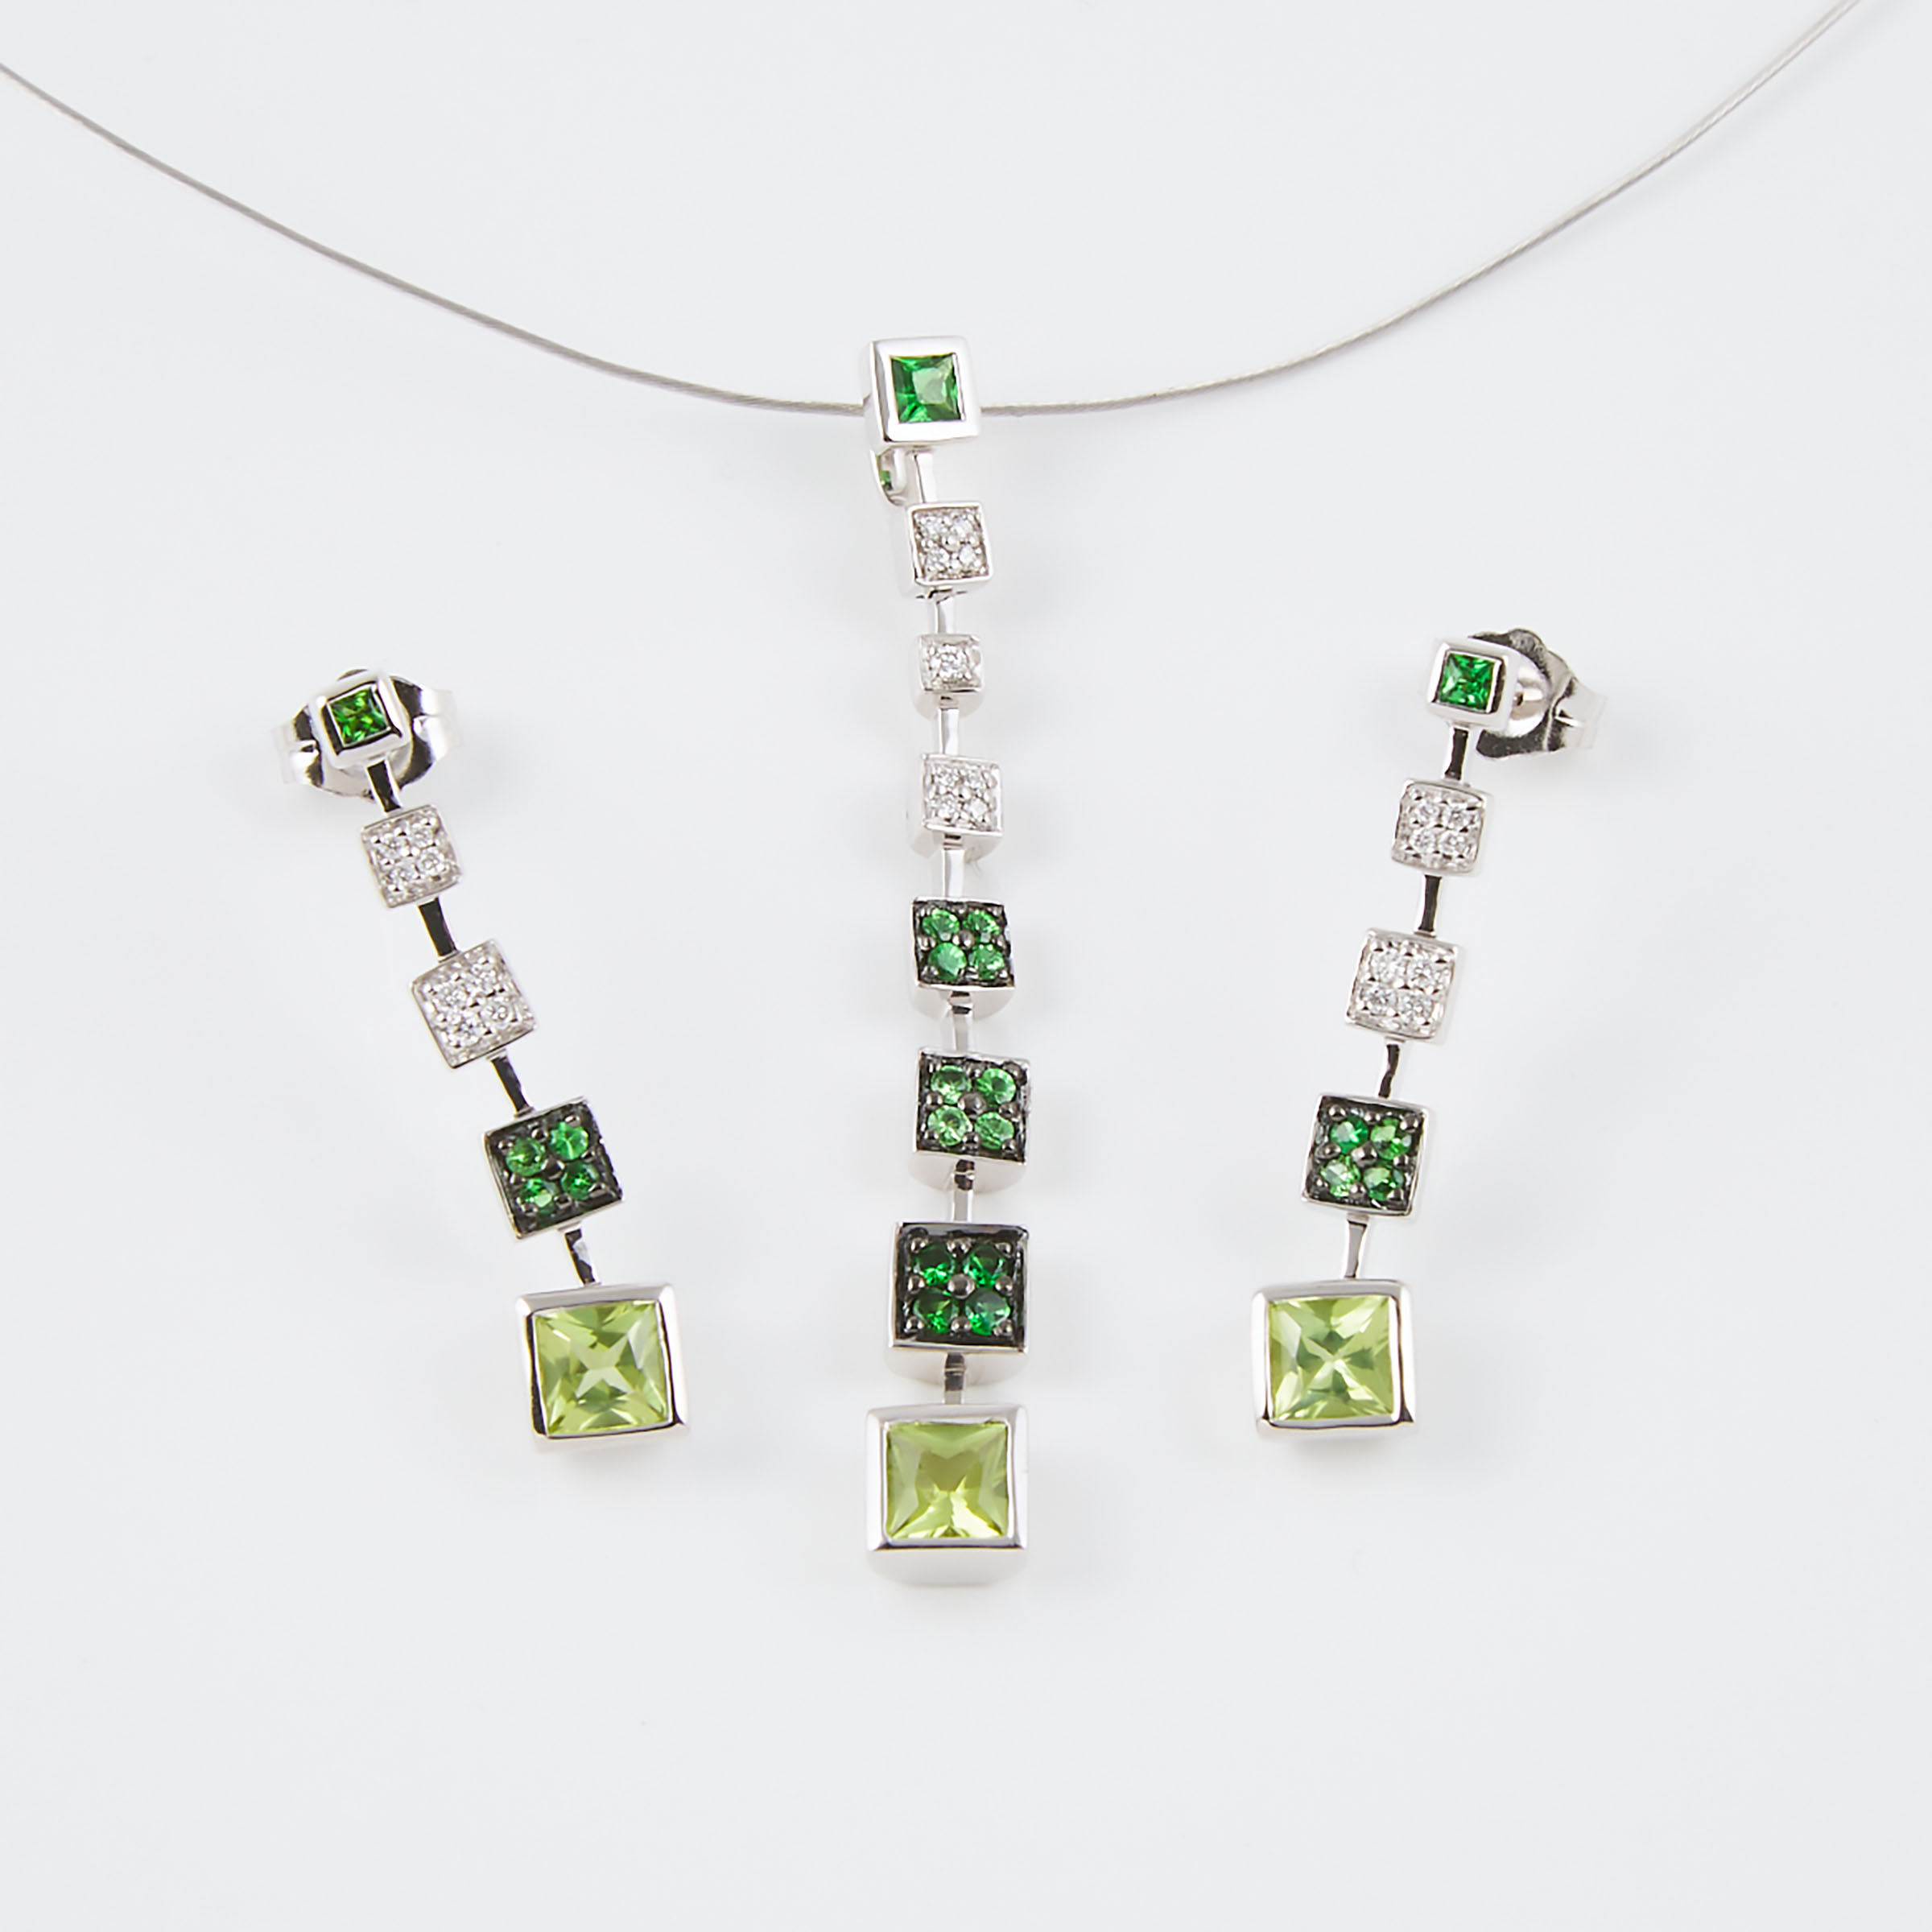 Pair Of 18k White Gold Earrings And A Matching Pendant